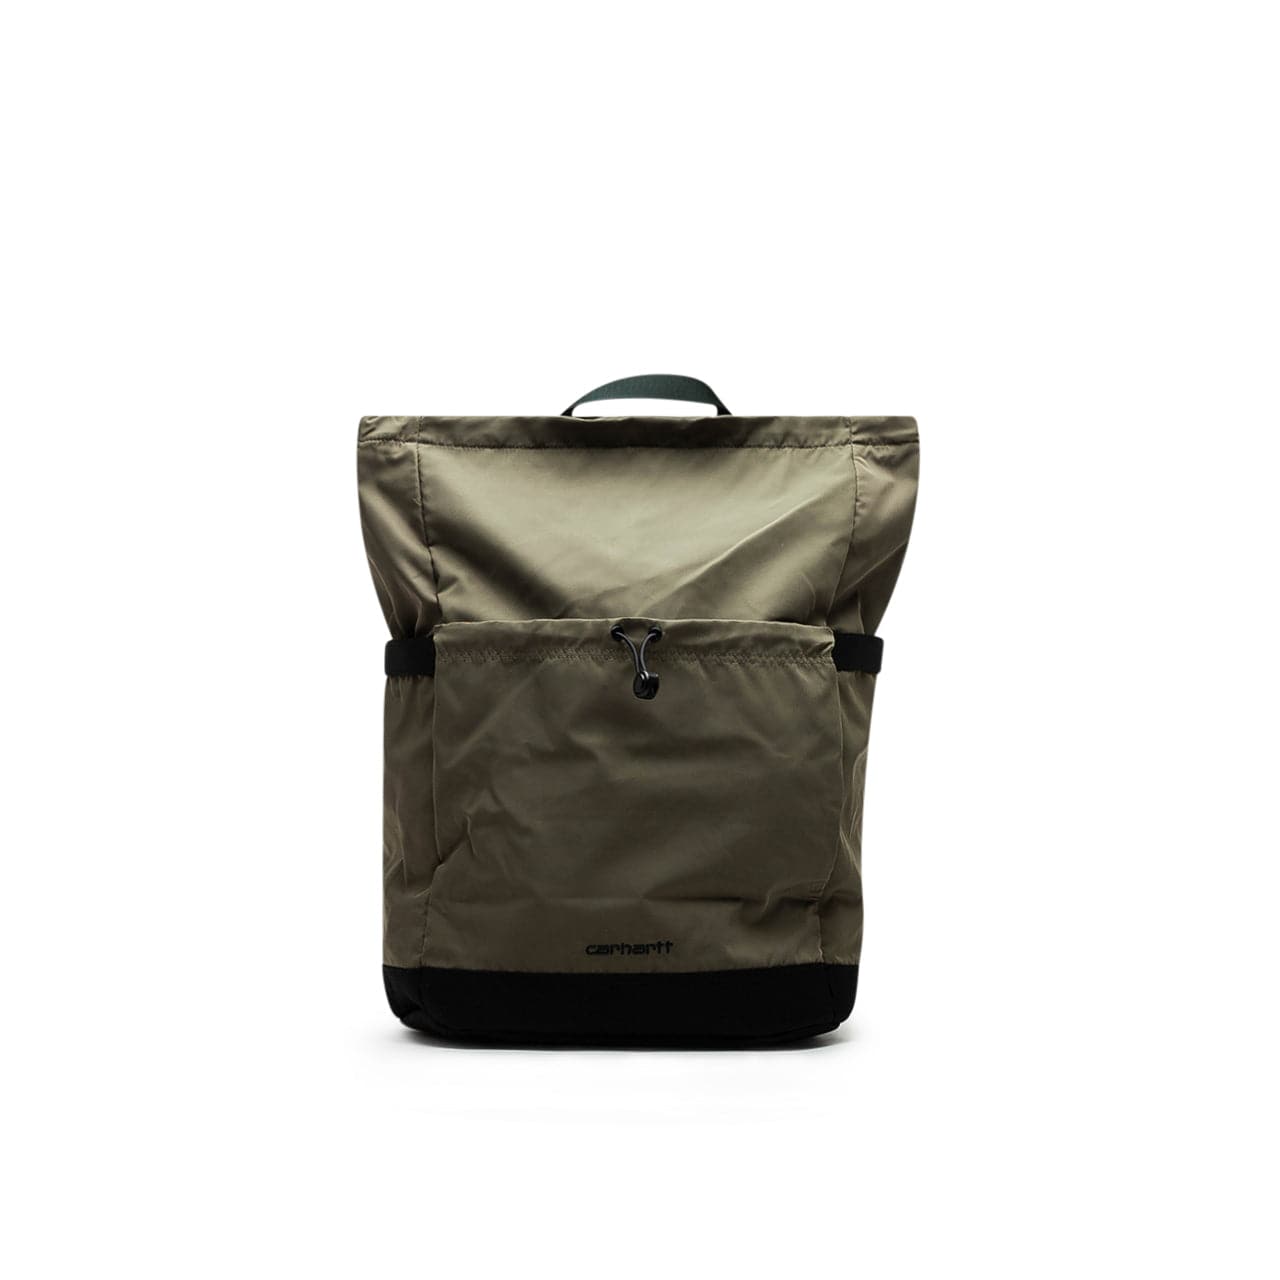 Image of Carhartt WIP Bayshore Backpack (Olive)